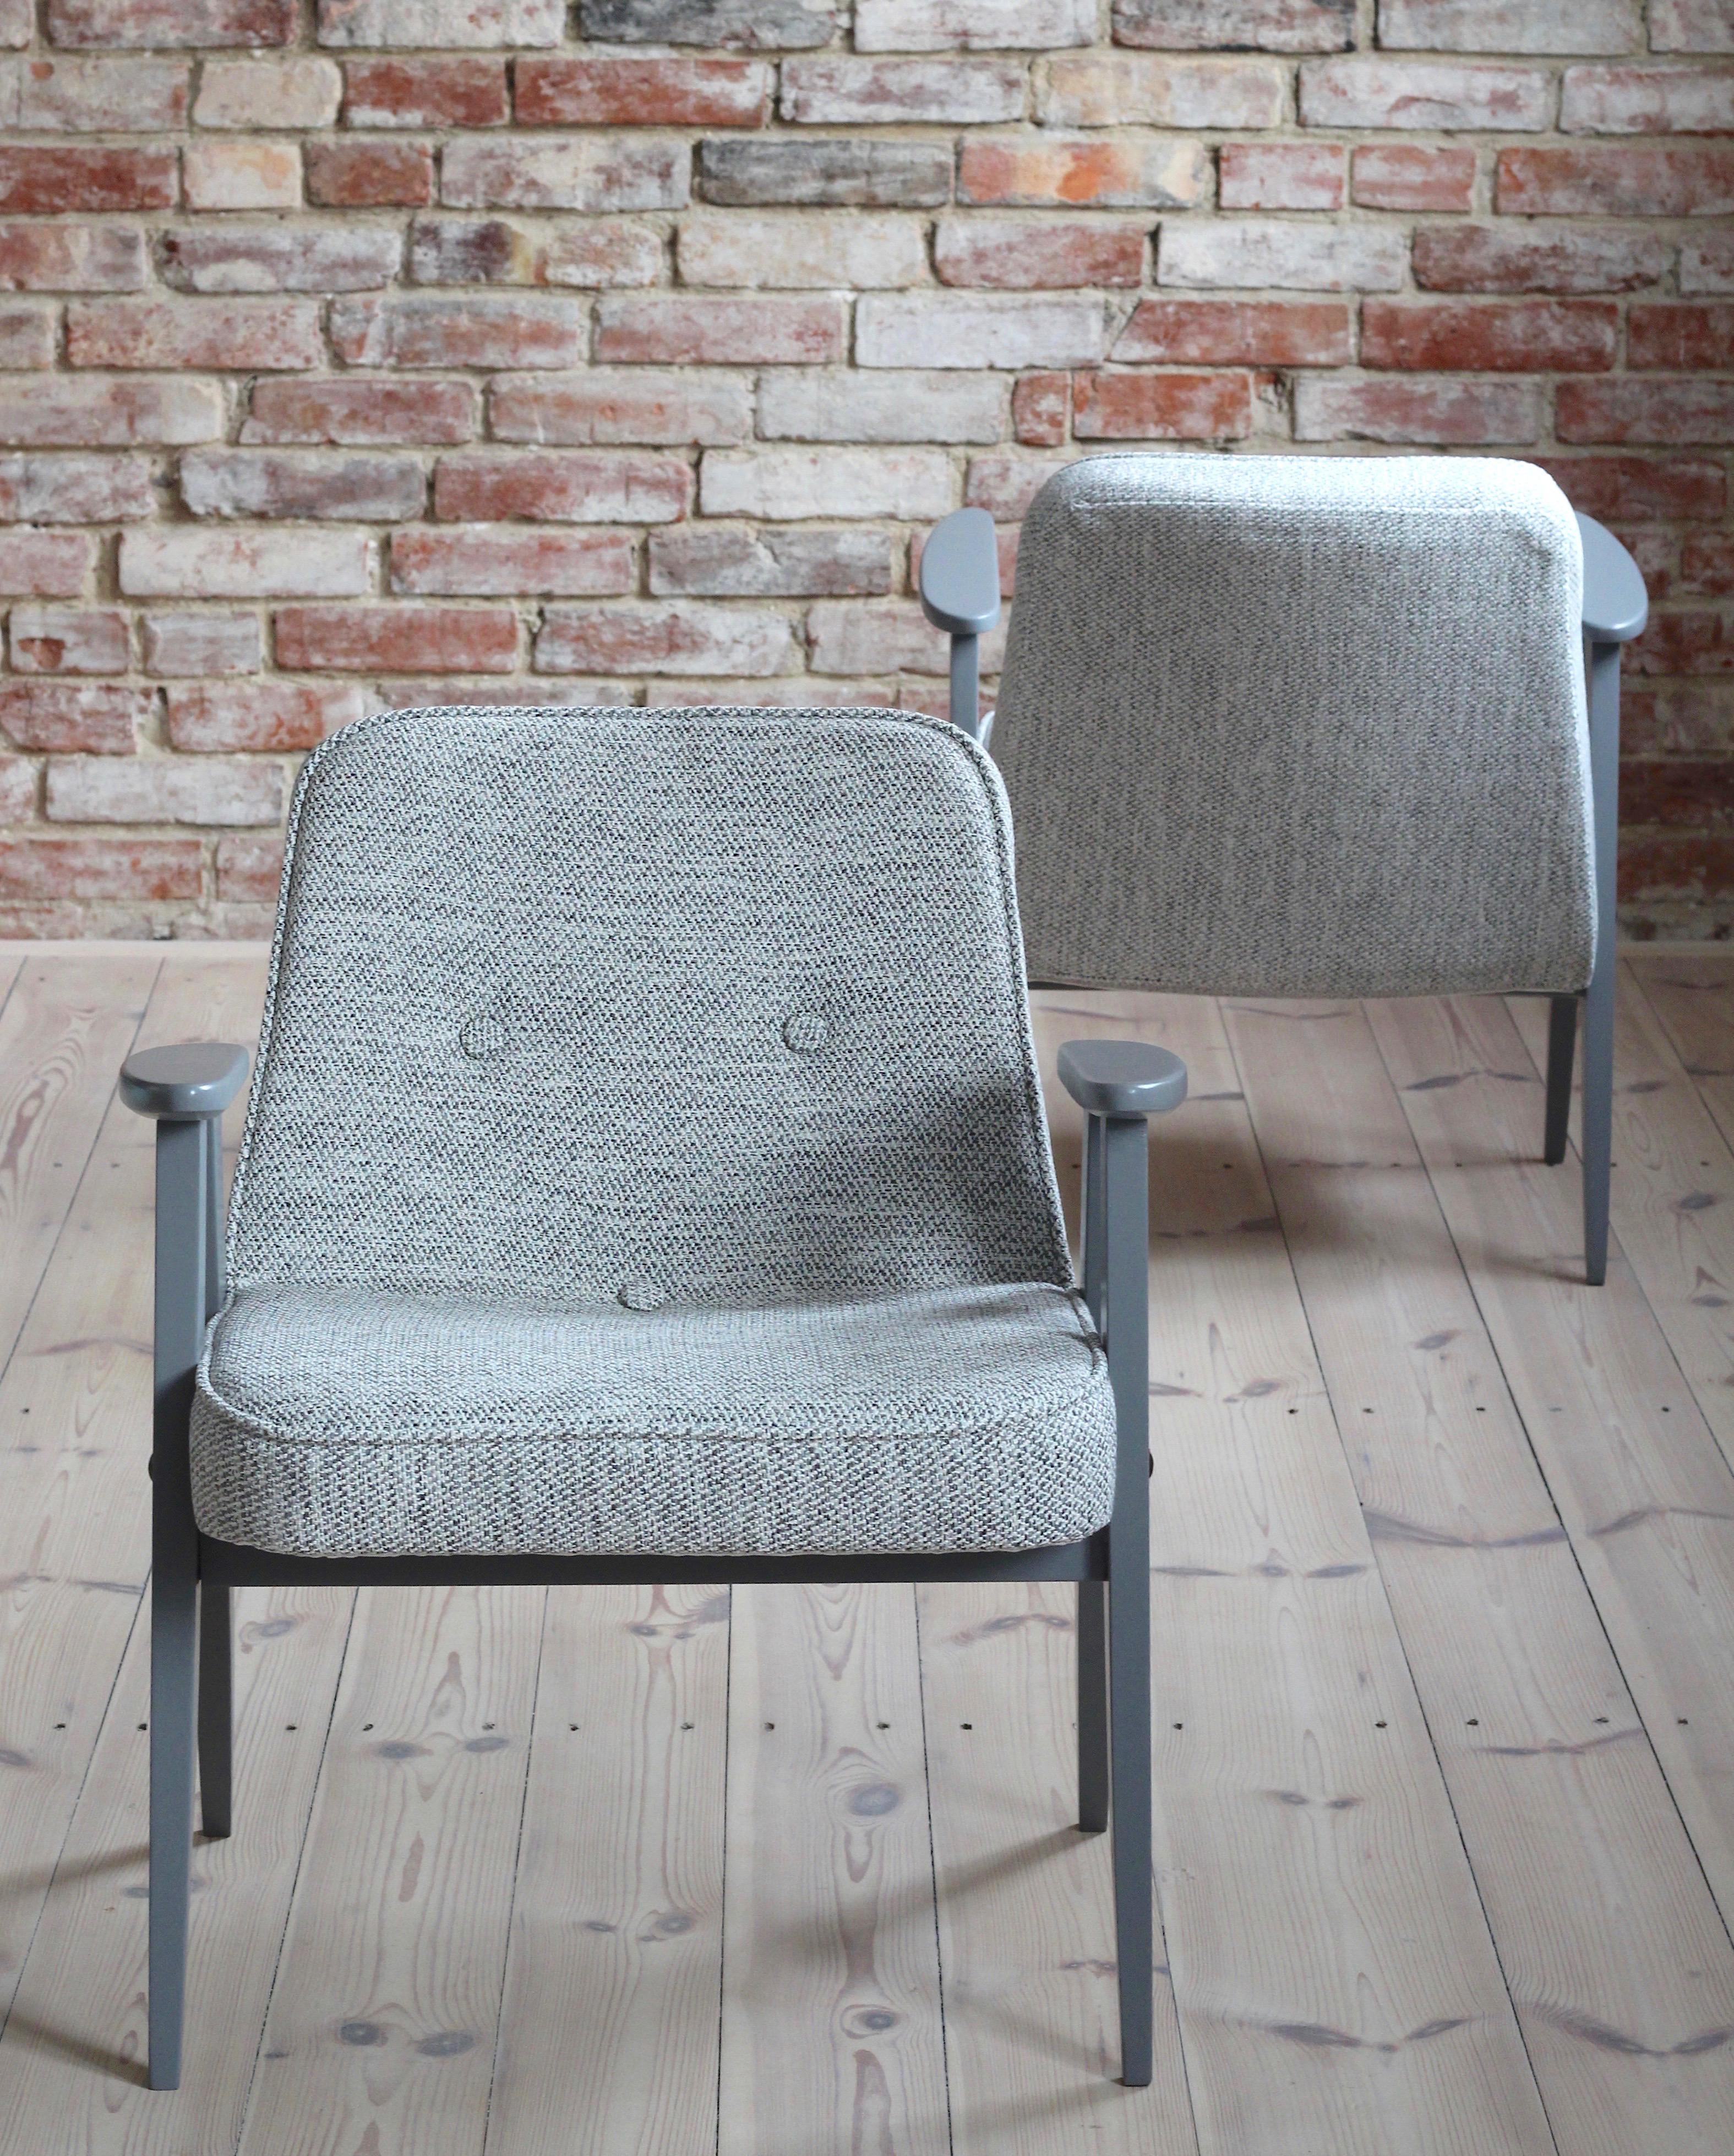 Jozef Chierowski armchairs were a neatly designed offer for not so spacious living rooms of Polish families back in the communism era. One of the most popular model back in those days that offered comfortable rest position and smartly fitted in